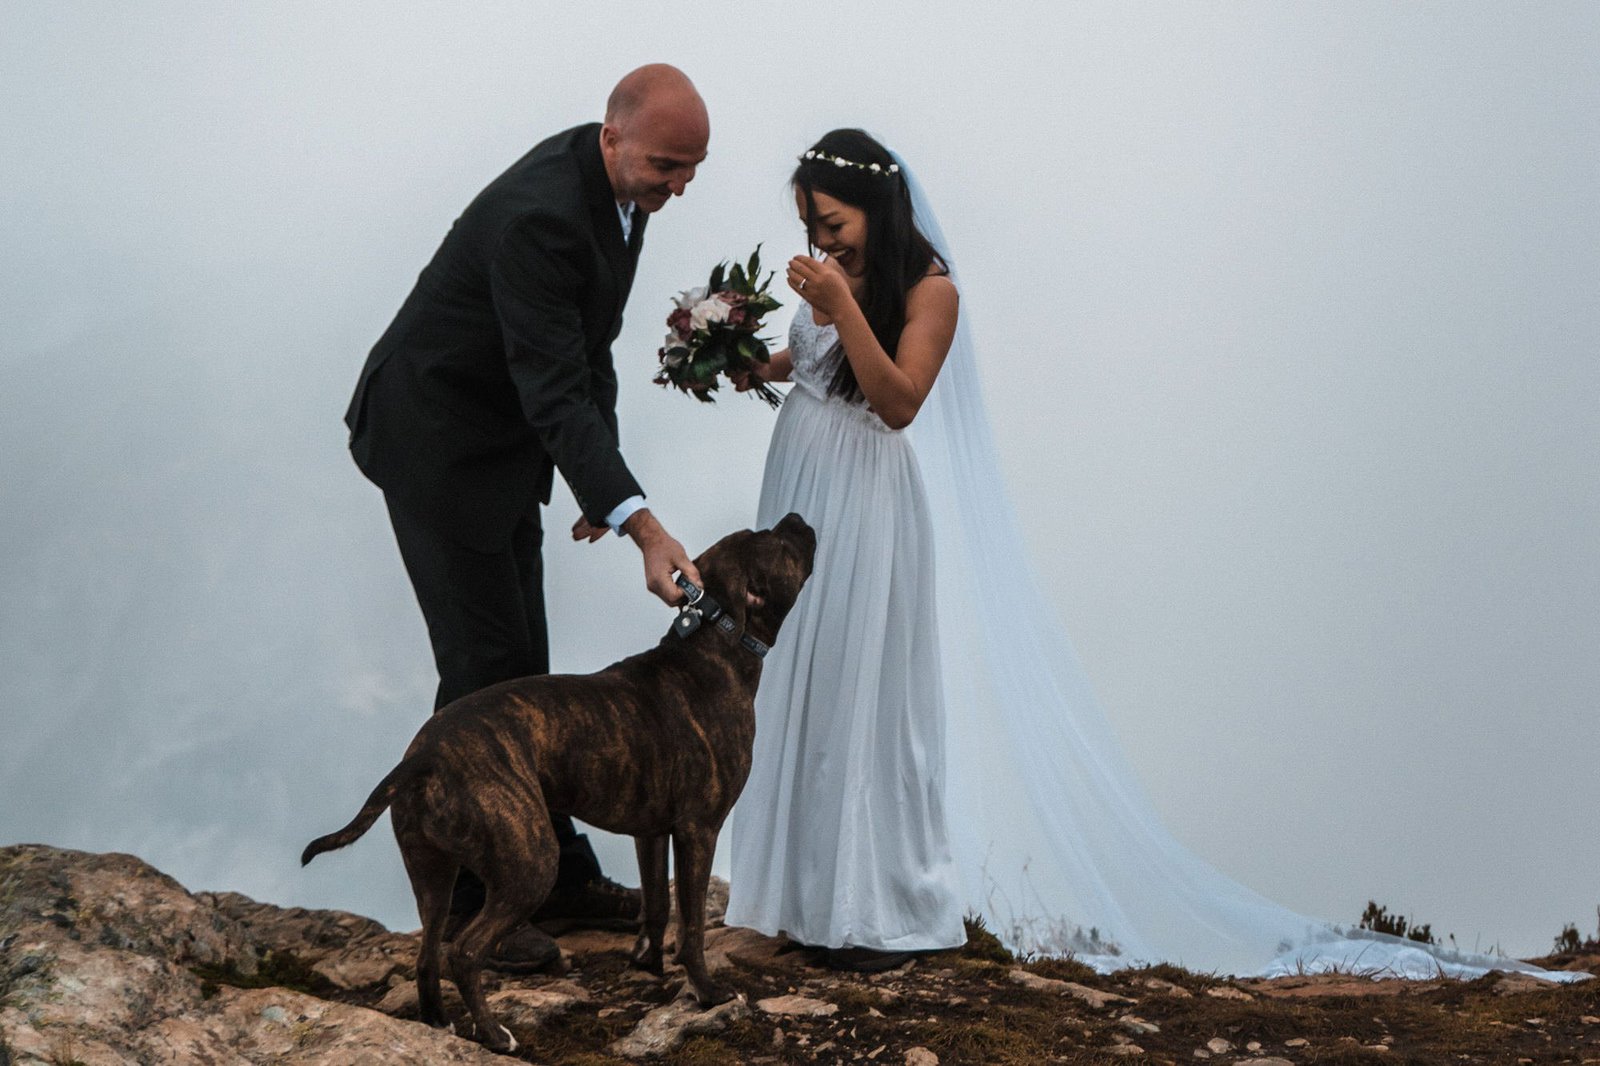 Bride and groom share first look moment with dog.